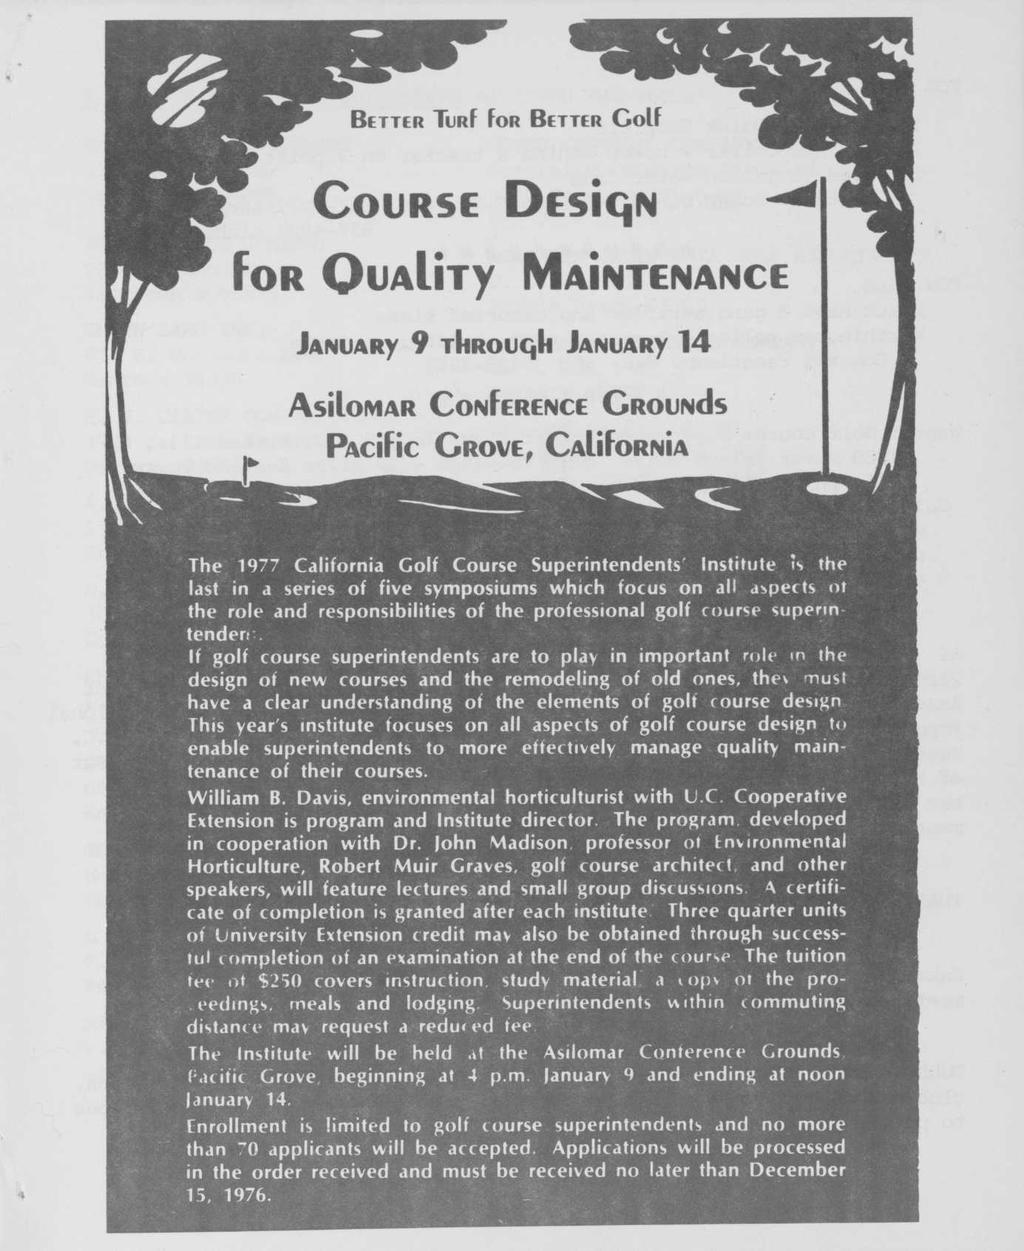 BETTER TURÌ ÌOR BETTER Golf COURSE FOR QUALITY DESIQN MAINTENANCE January 9 ThRouqh January 1 4 AsiloMAR ConFerence GrouncIs PAcific Grove, CaIiFornia The 1977 California Golf Course Superintendents'